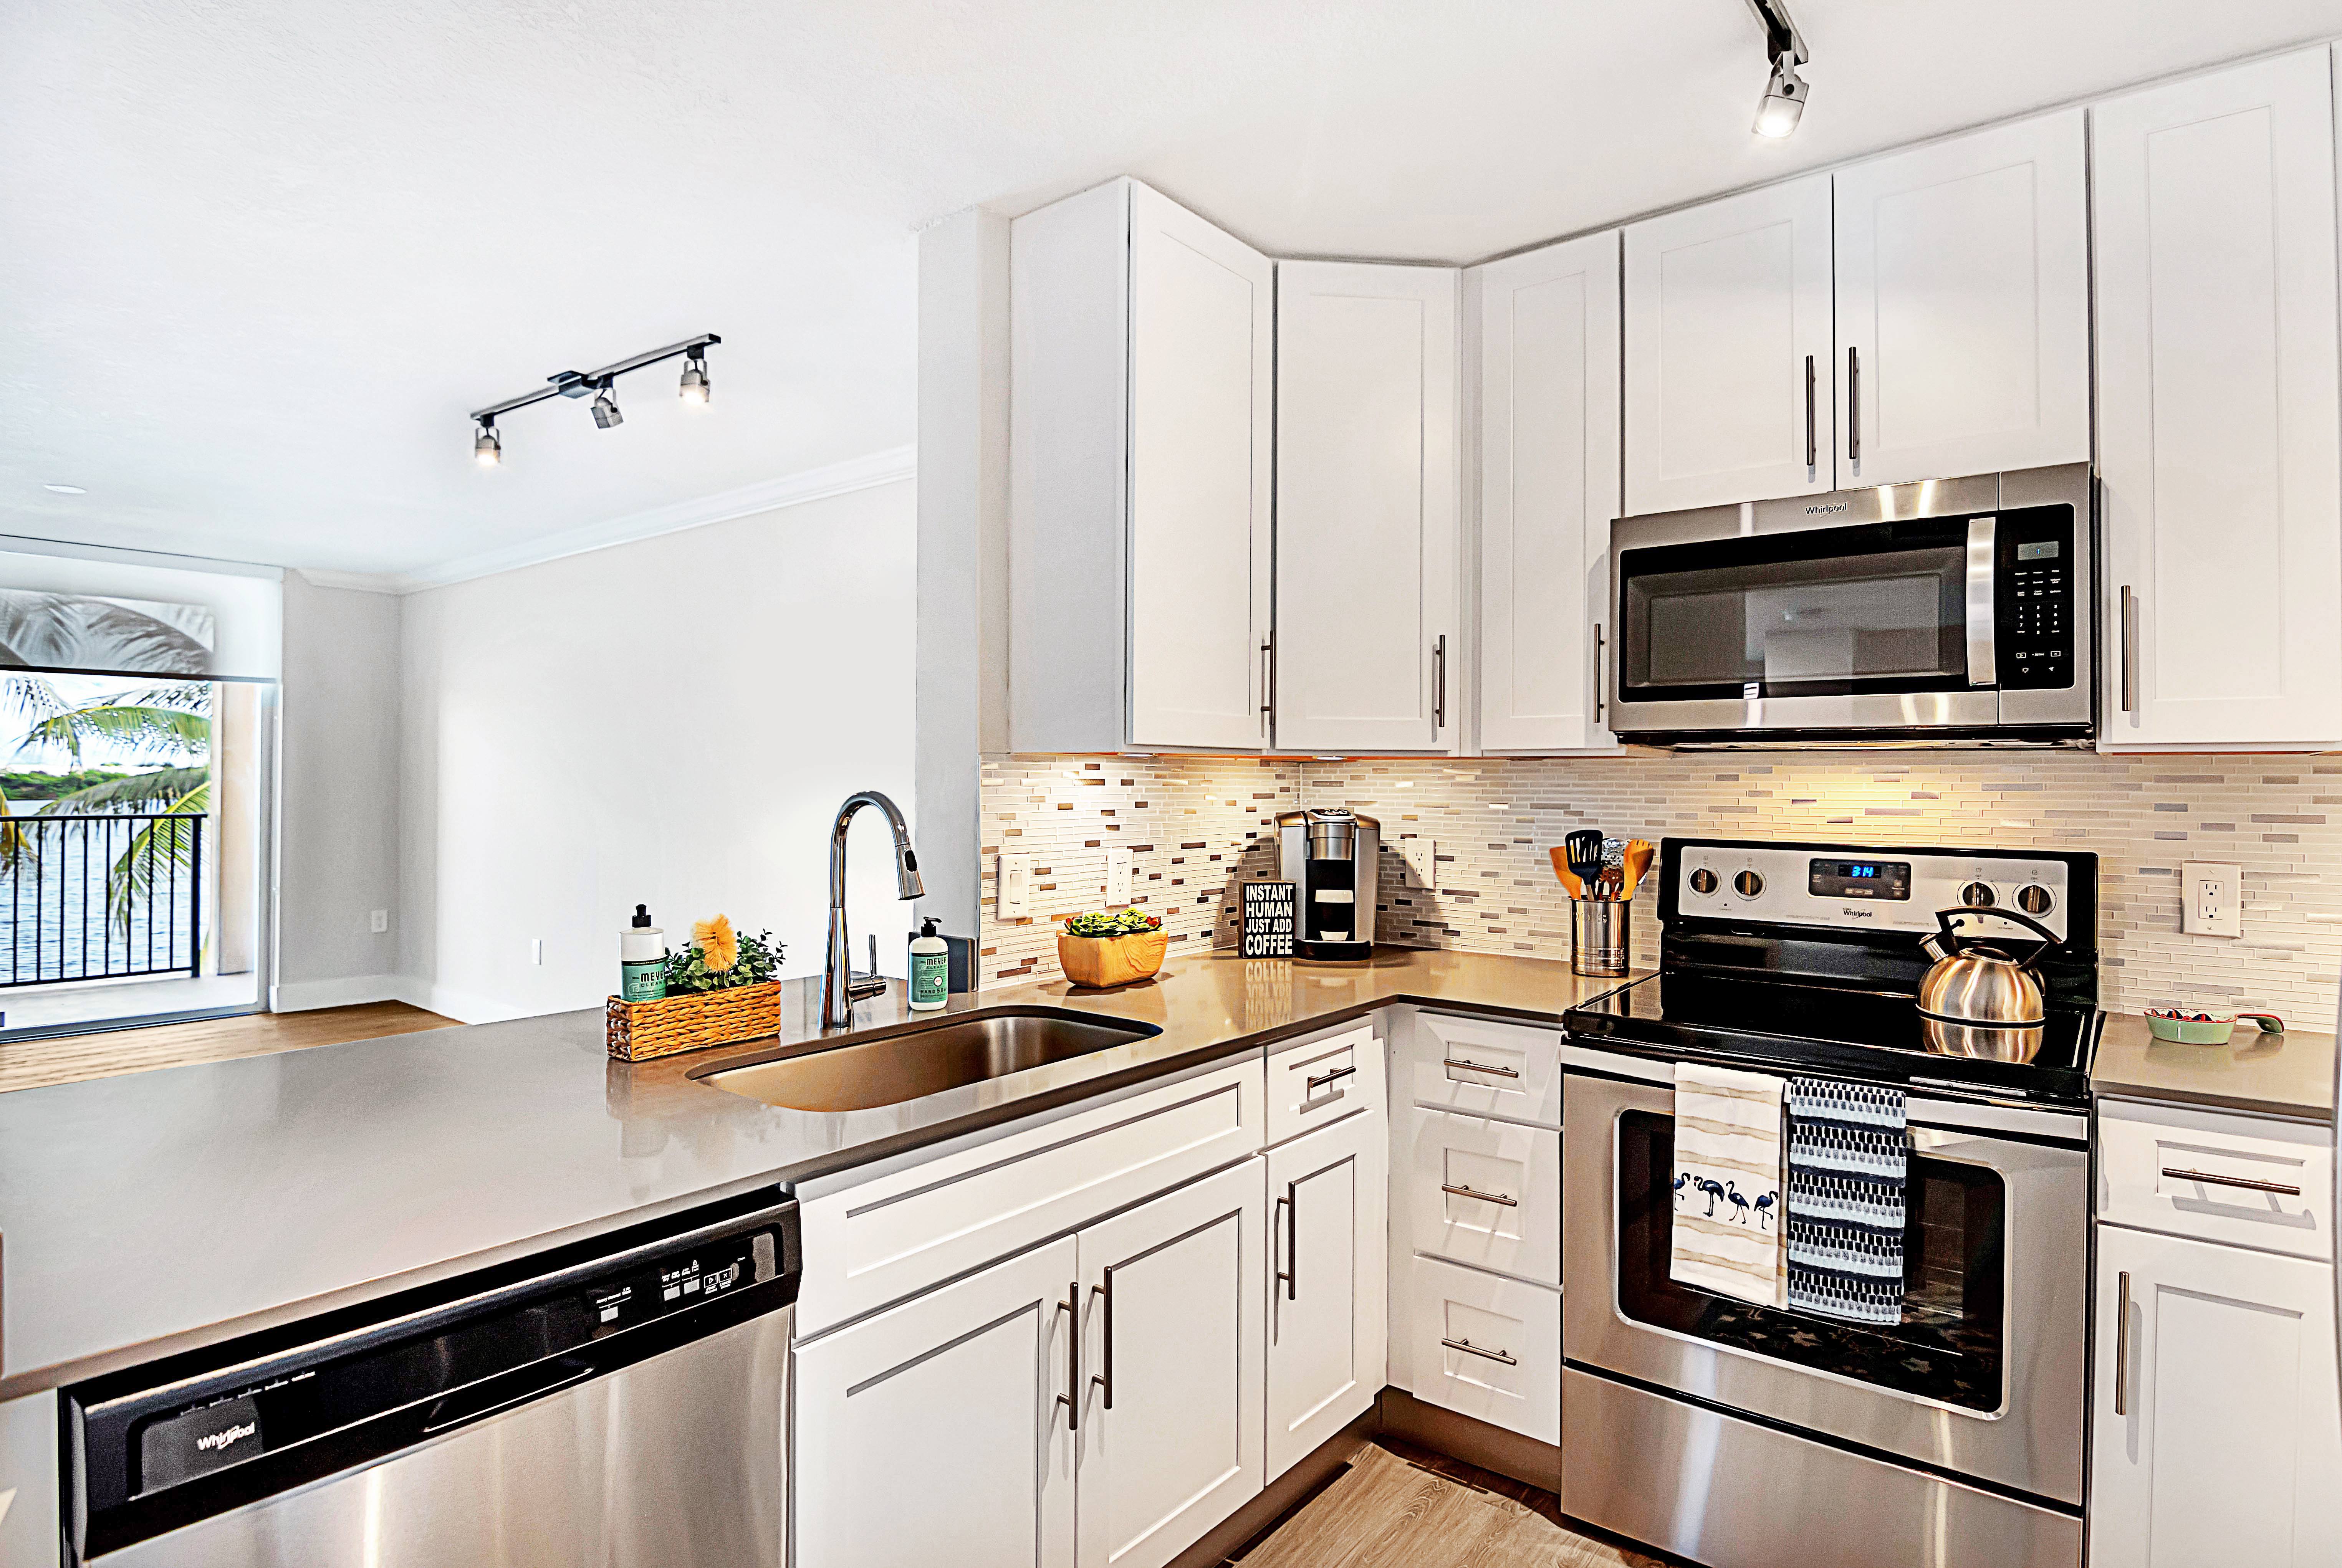 Stainless steel appliances and open kitchen at St. Tropez Apartments in Miami Lakes, Florida